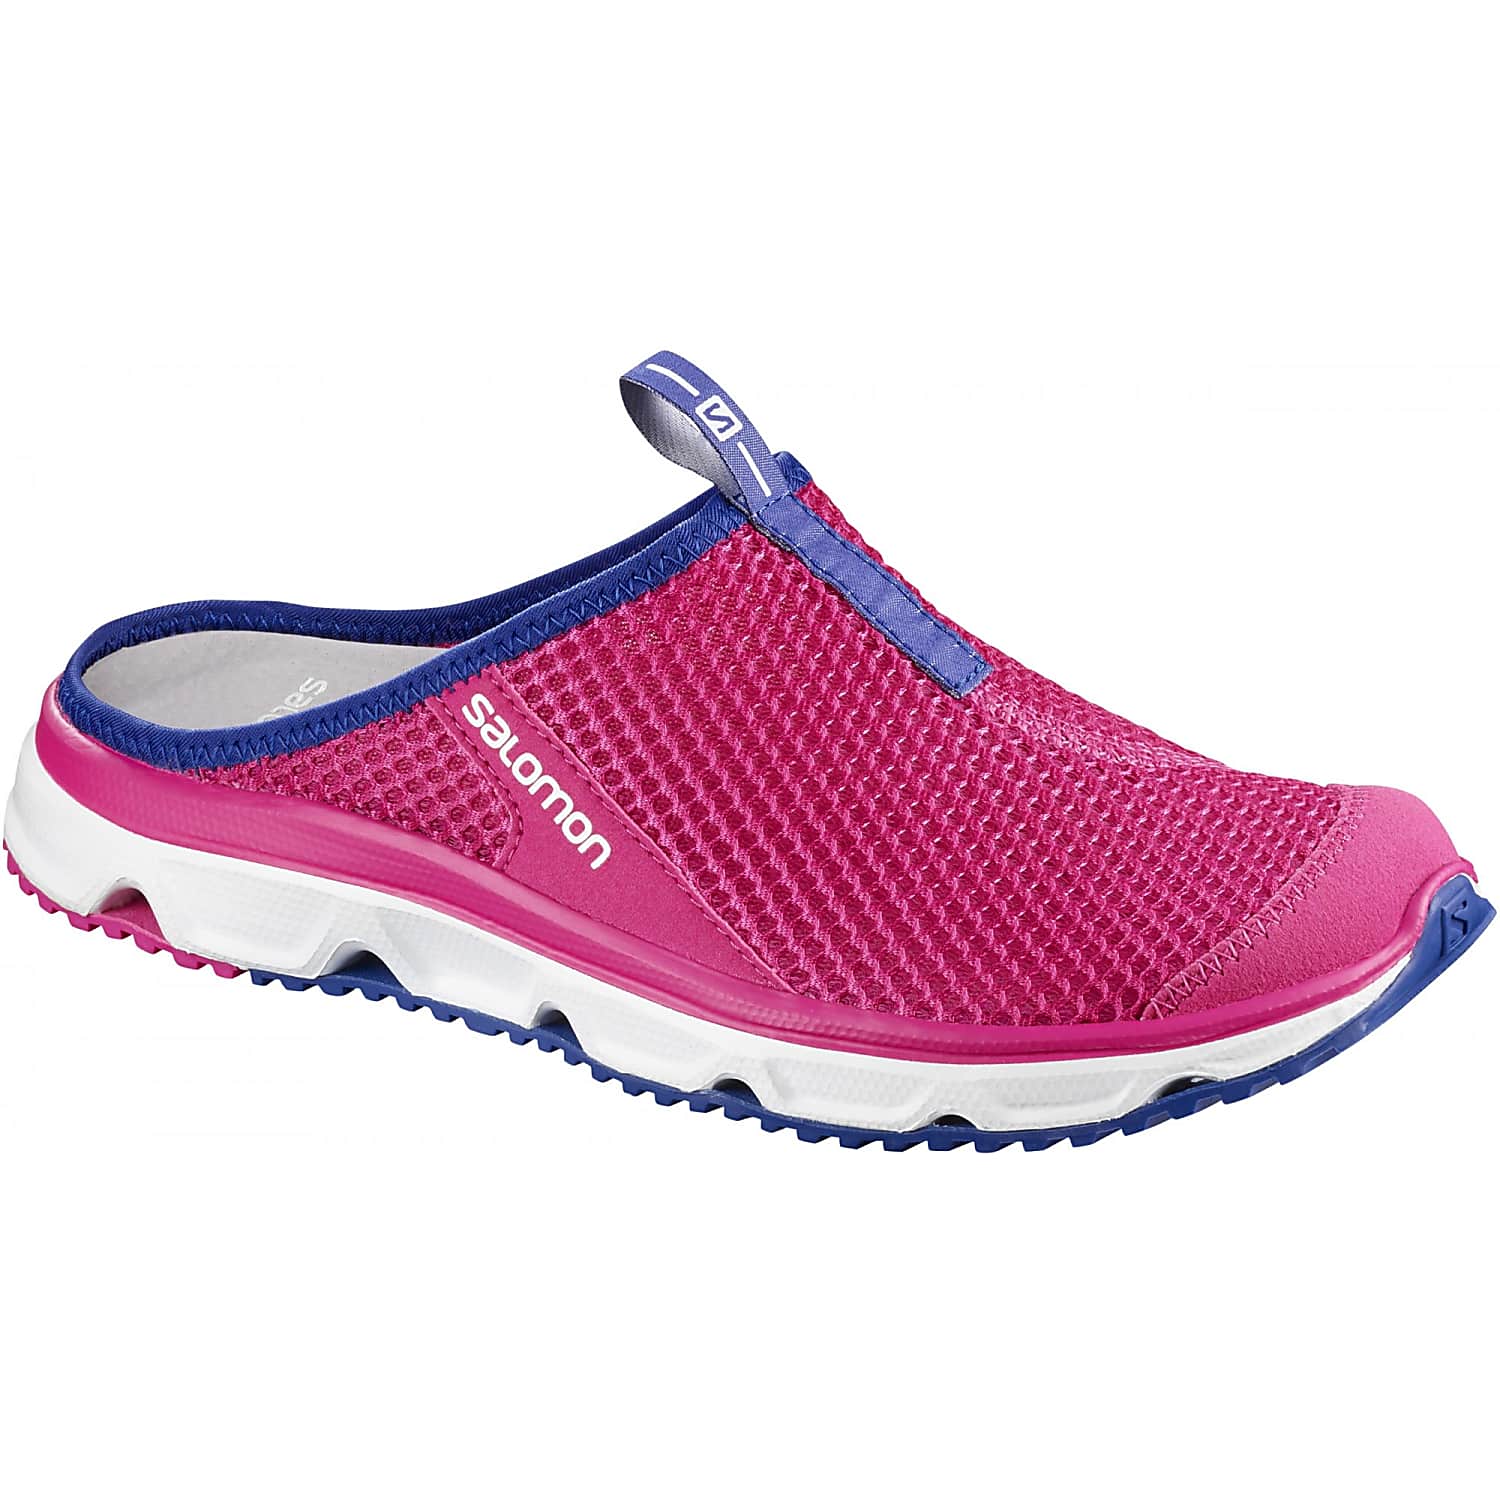 Salomon W RX SLIDE 3.0, Pink - White - Surf The Web - Fast and cheap shipping - www.exxpozed.com